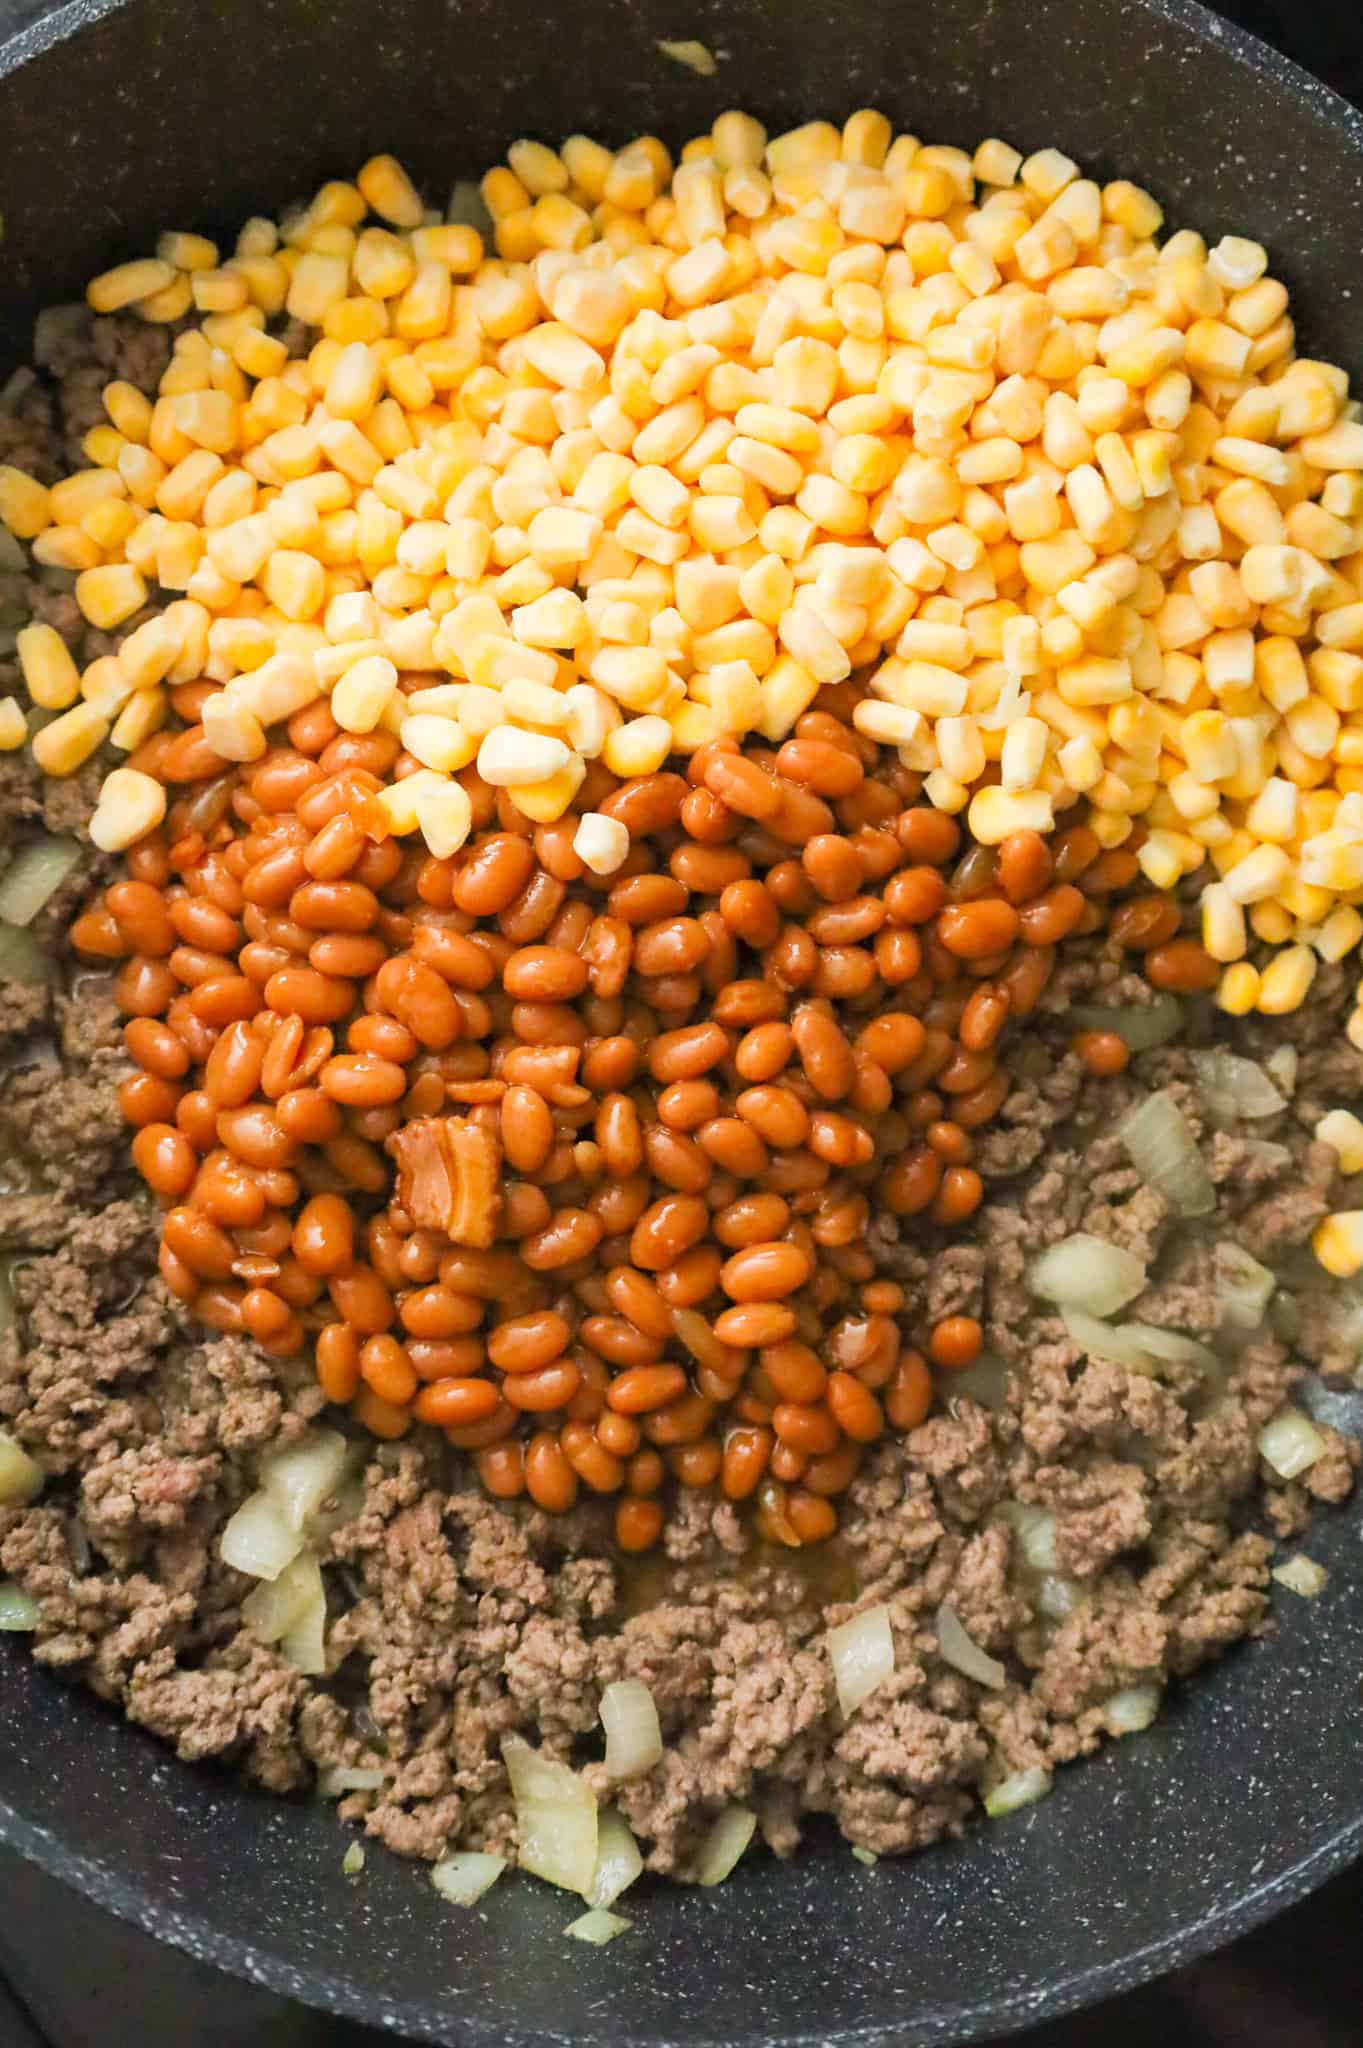 baked beans, frozen corn kernels and cooked ground beef in a skillet